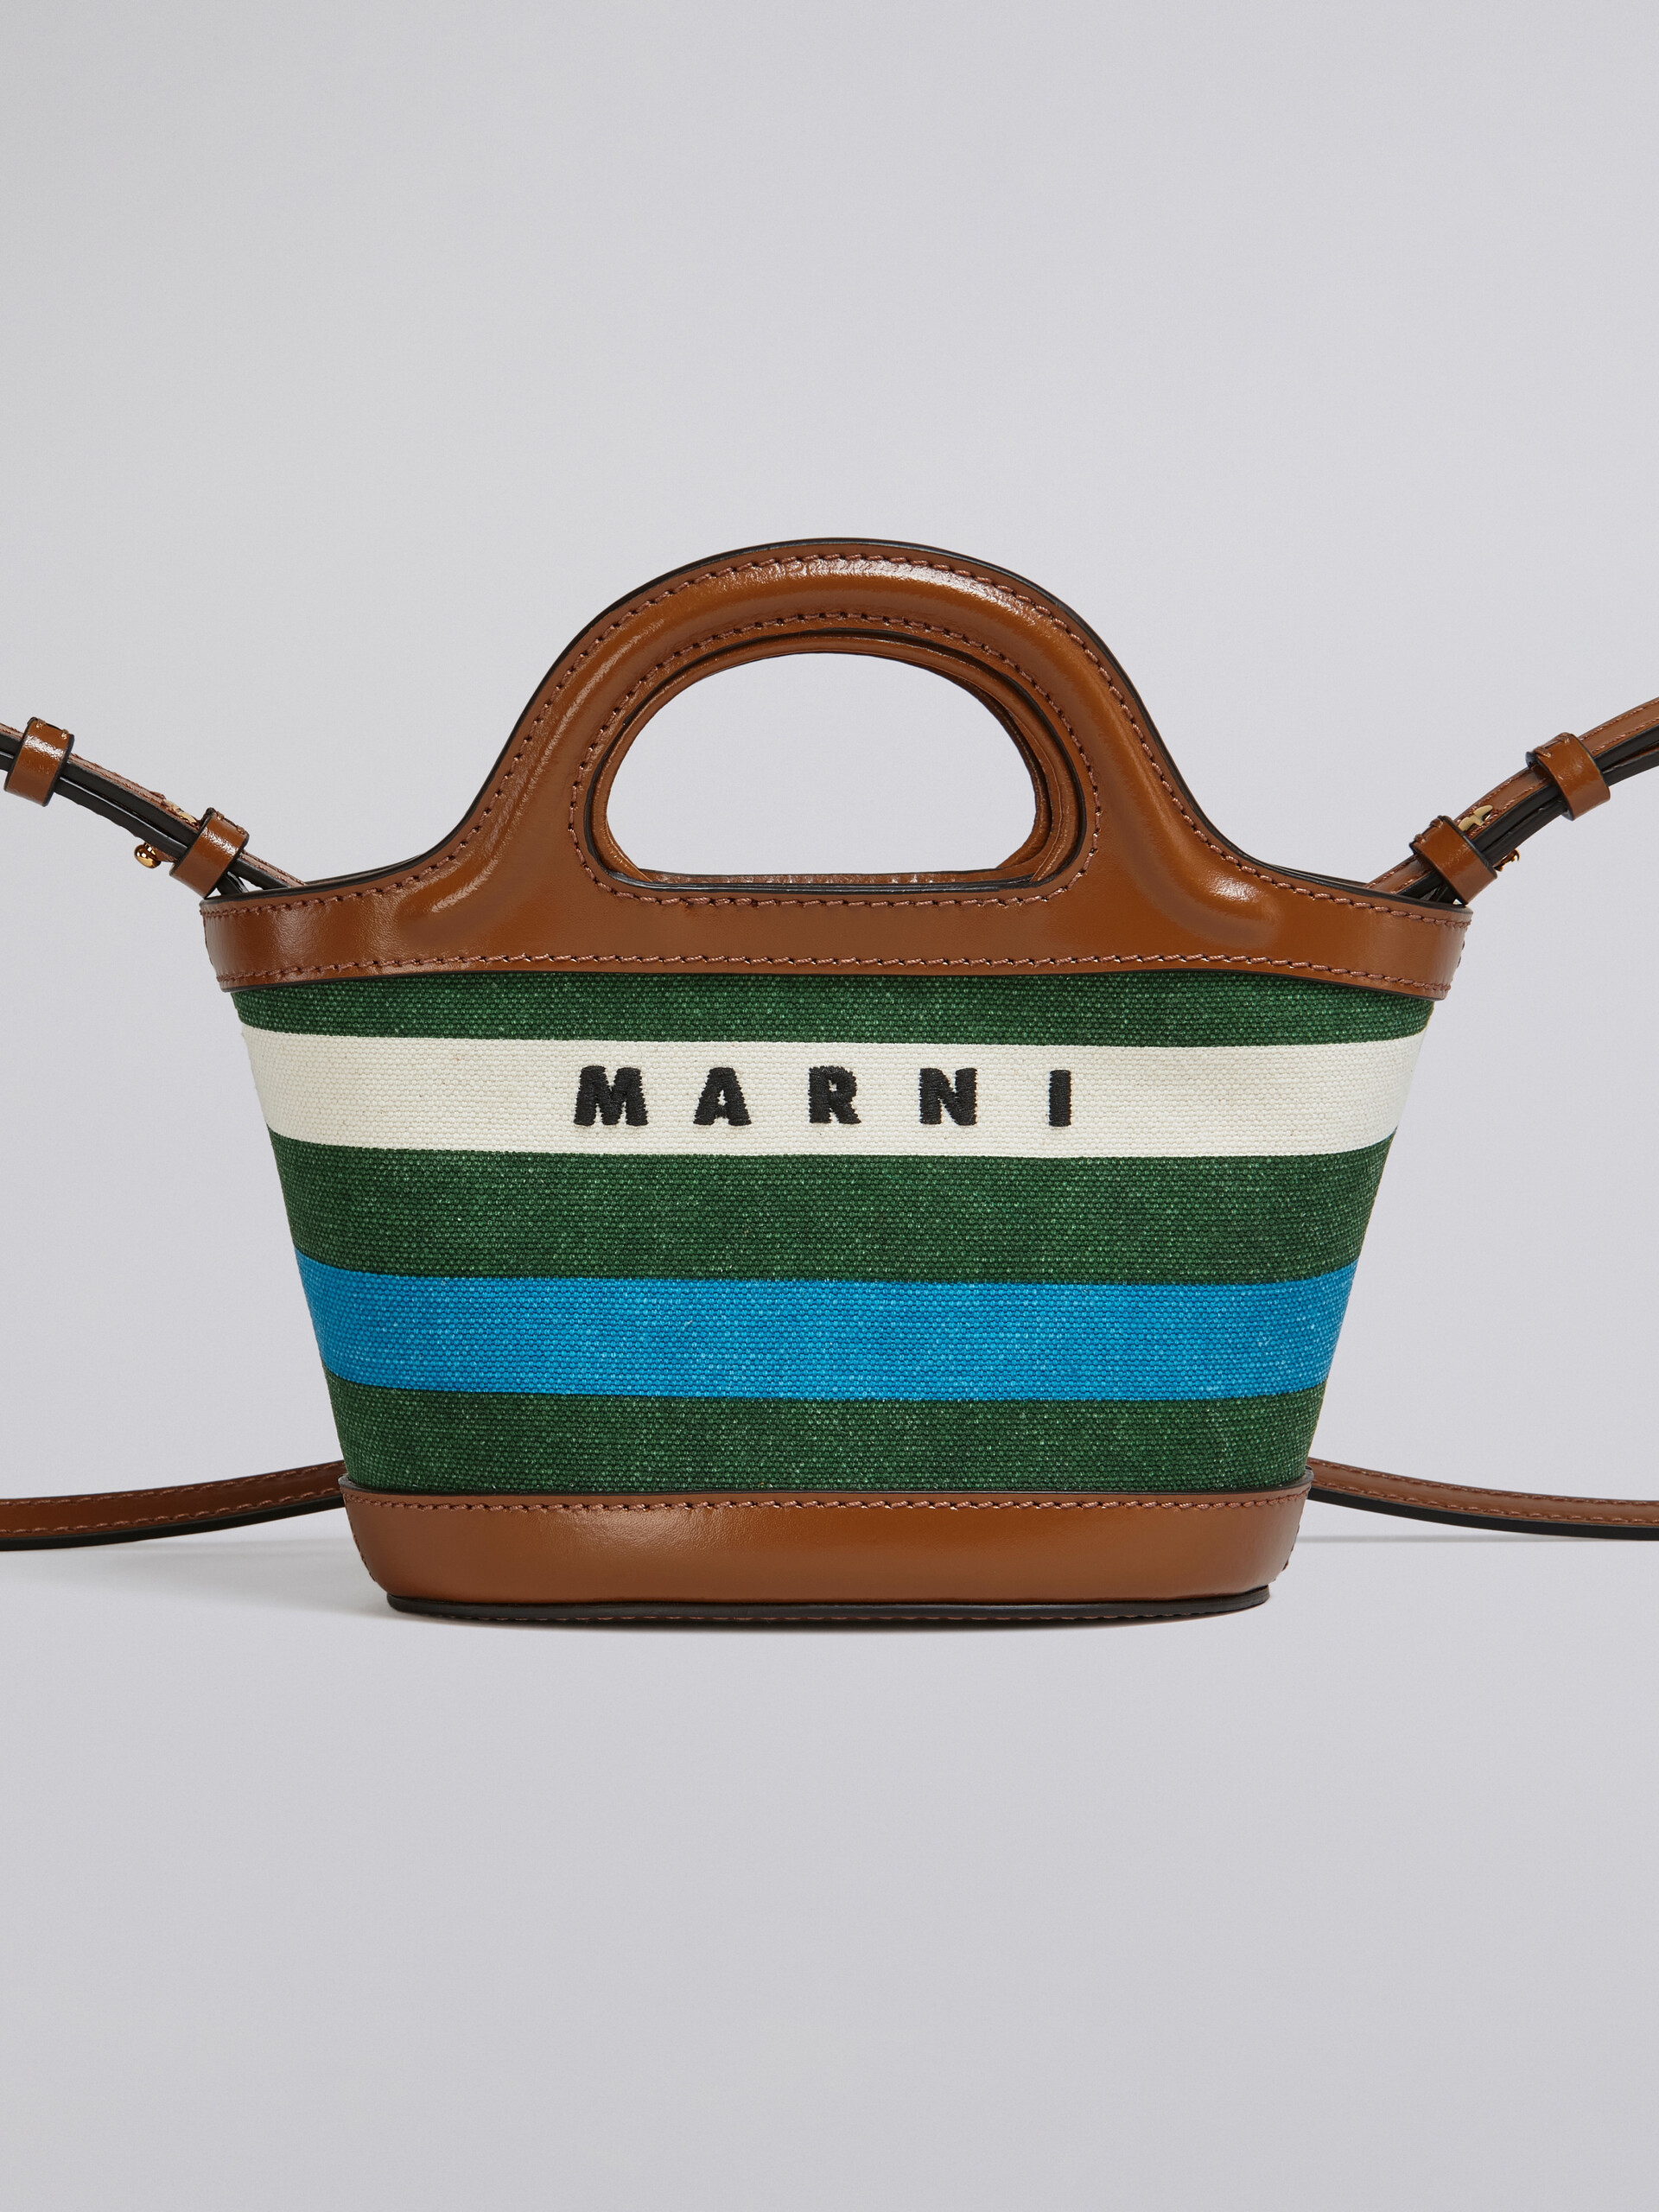 TROPICALIA micro bag in leather and striped canvas - Handbags - Image 5